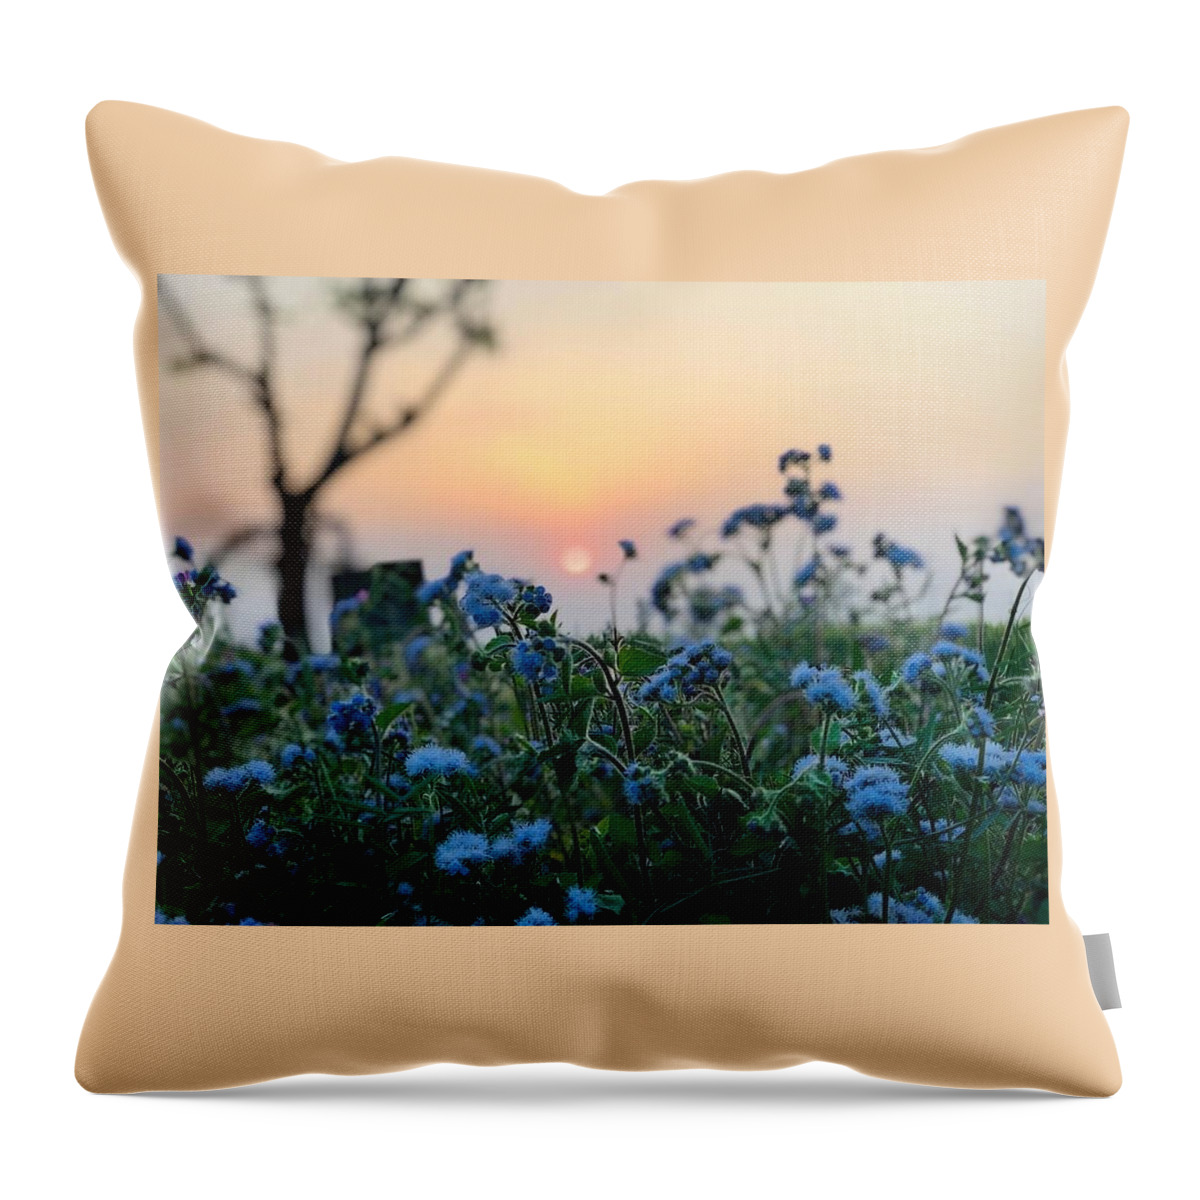 Flowers Throw Pillow featuring the photograph Sunset Behind Flowers by Prashant Dalal